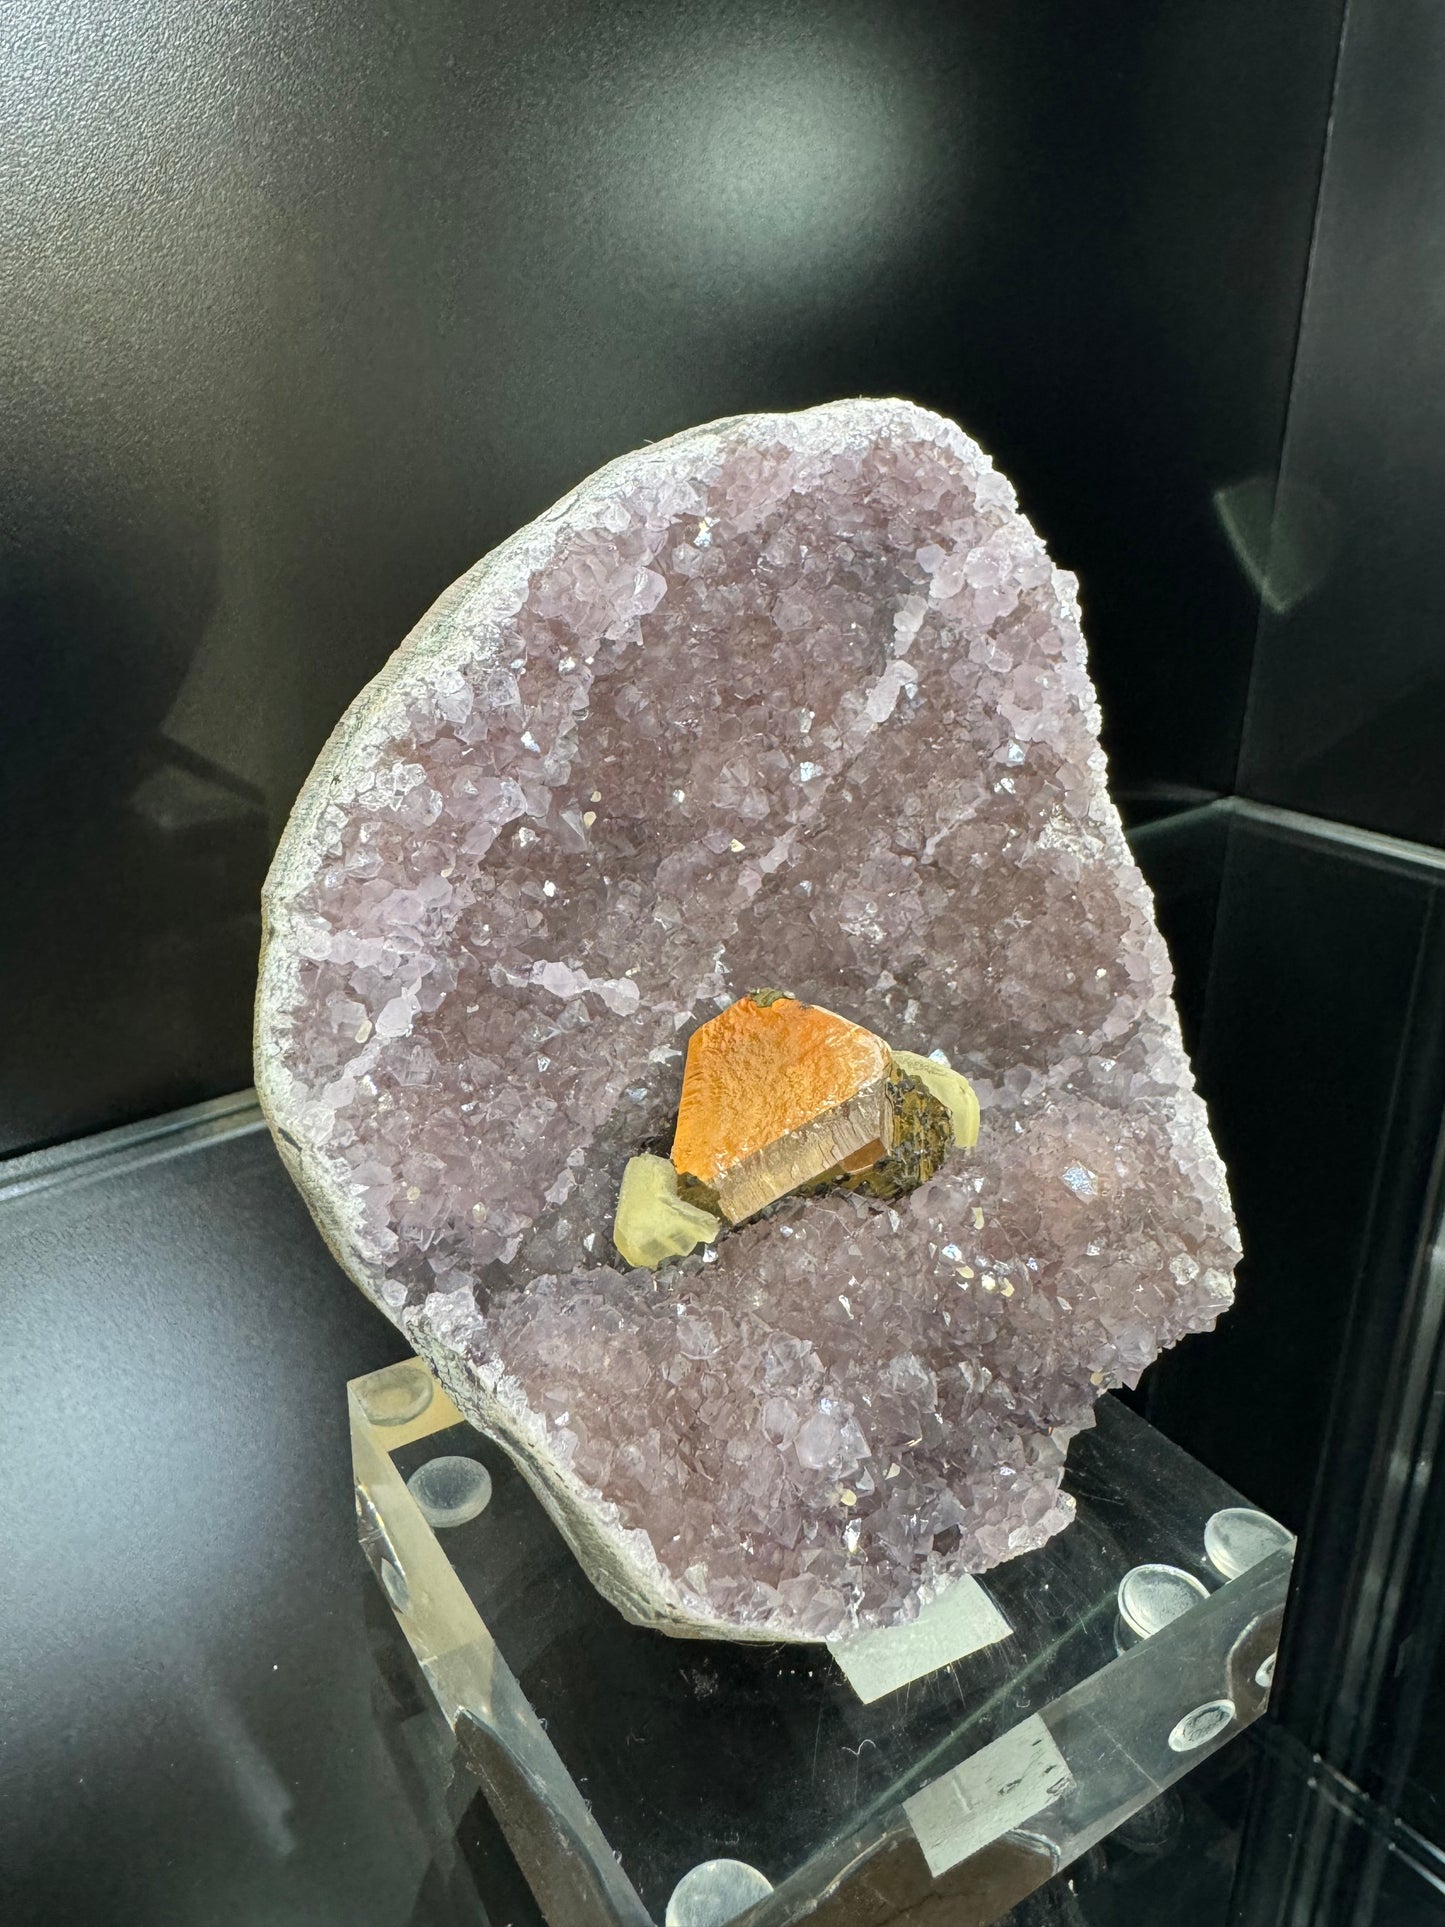 Amethyst Geode with Crystal Inclusions Mineral Specimen